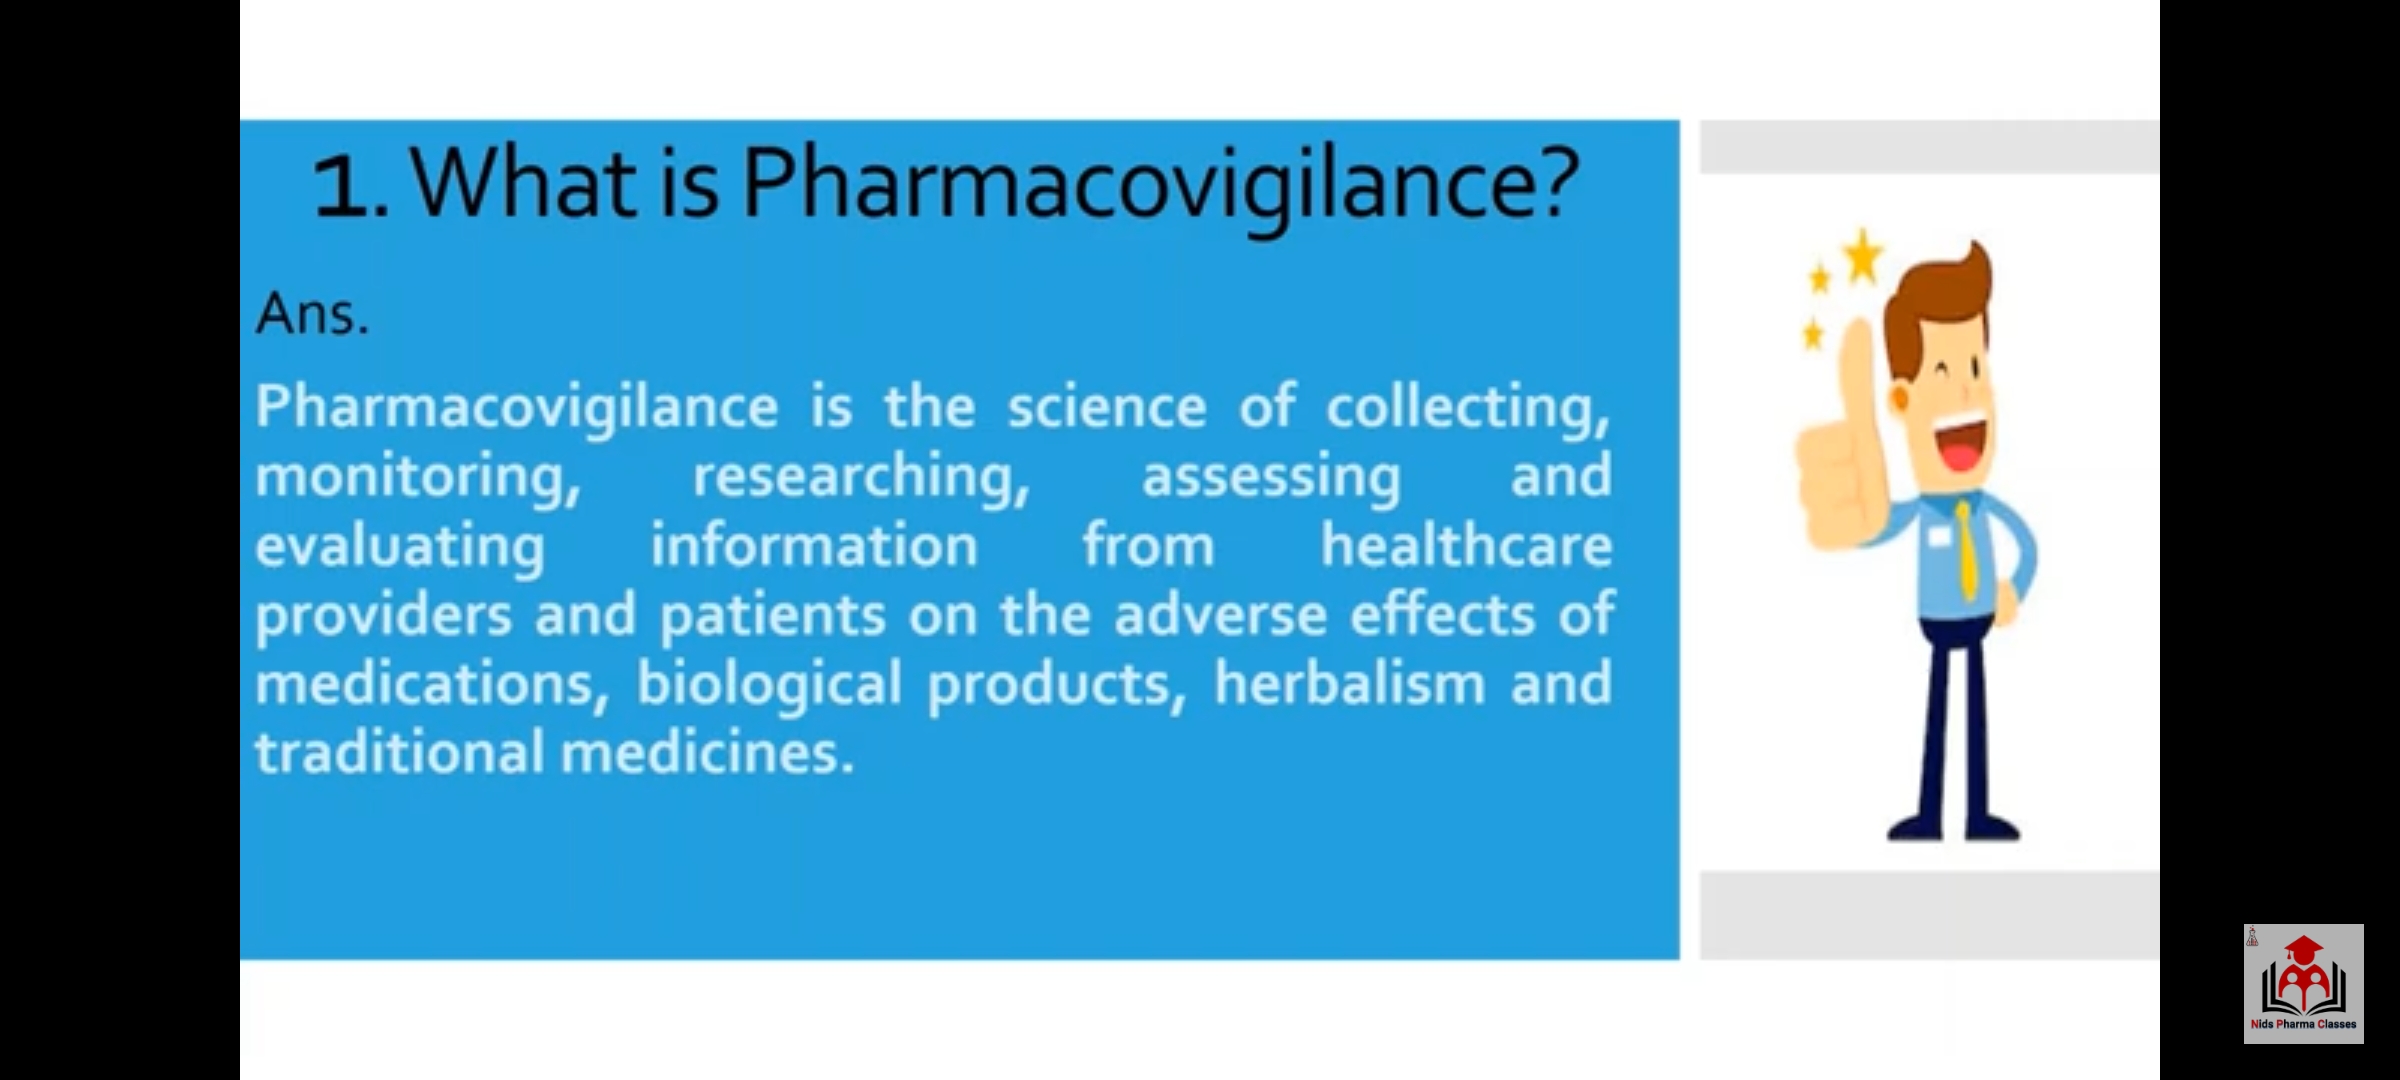 Pharmacovigilance is the science of collecting,
monitoring, researching, assessing and
evaluating information from healthcare
providers and patients on the adverse effects of
medications, biological products, herbalism and
traditional medicines.